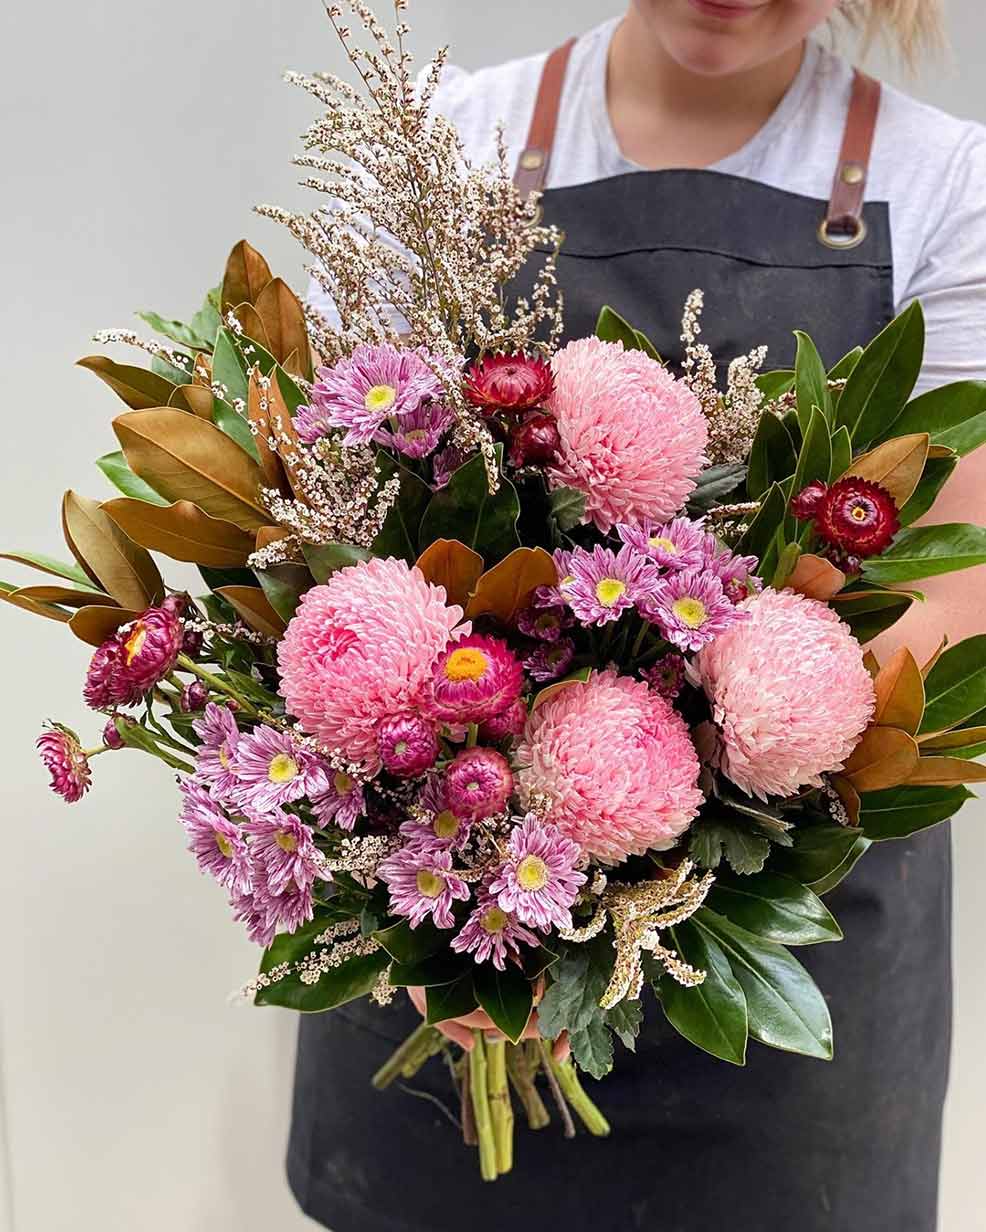 Bouquet of beautiful flowers | Featured Image for How to Keep Flowers Fresh blog by Poco Posy.